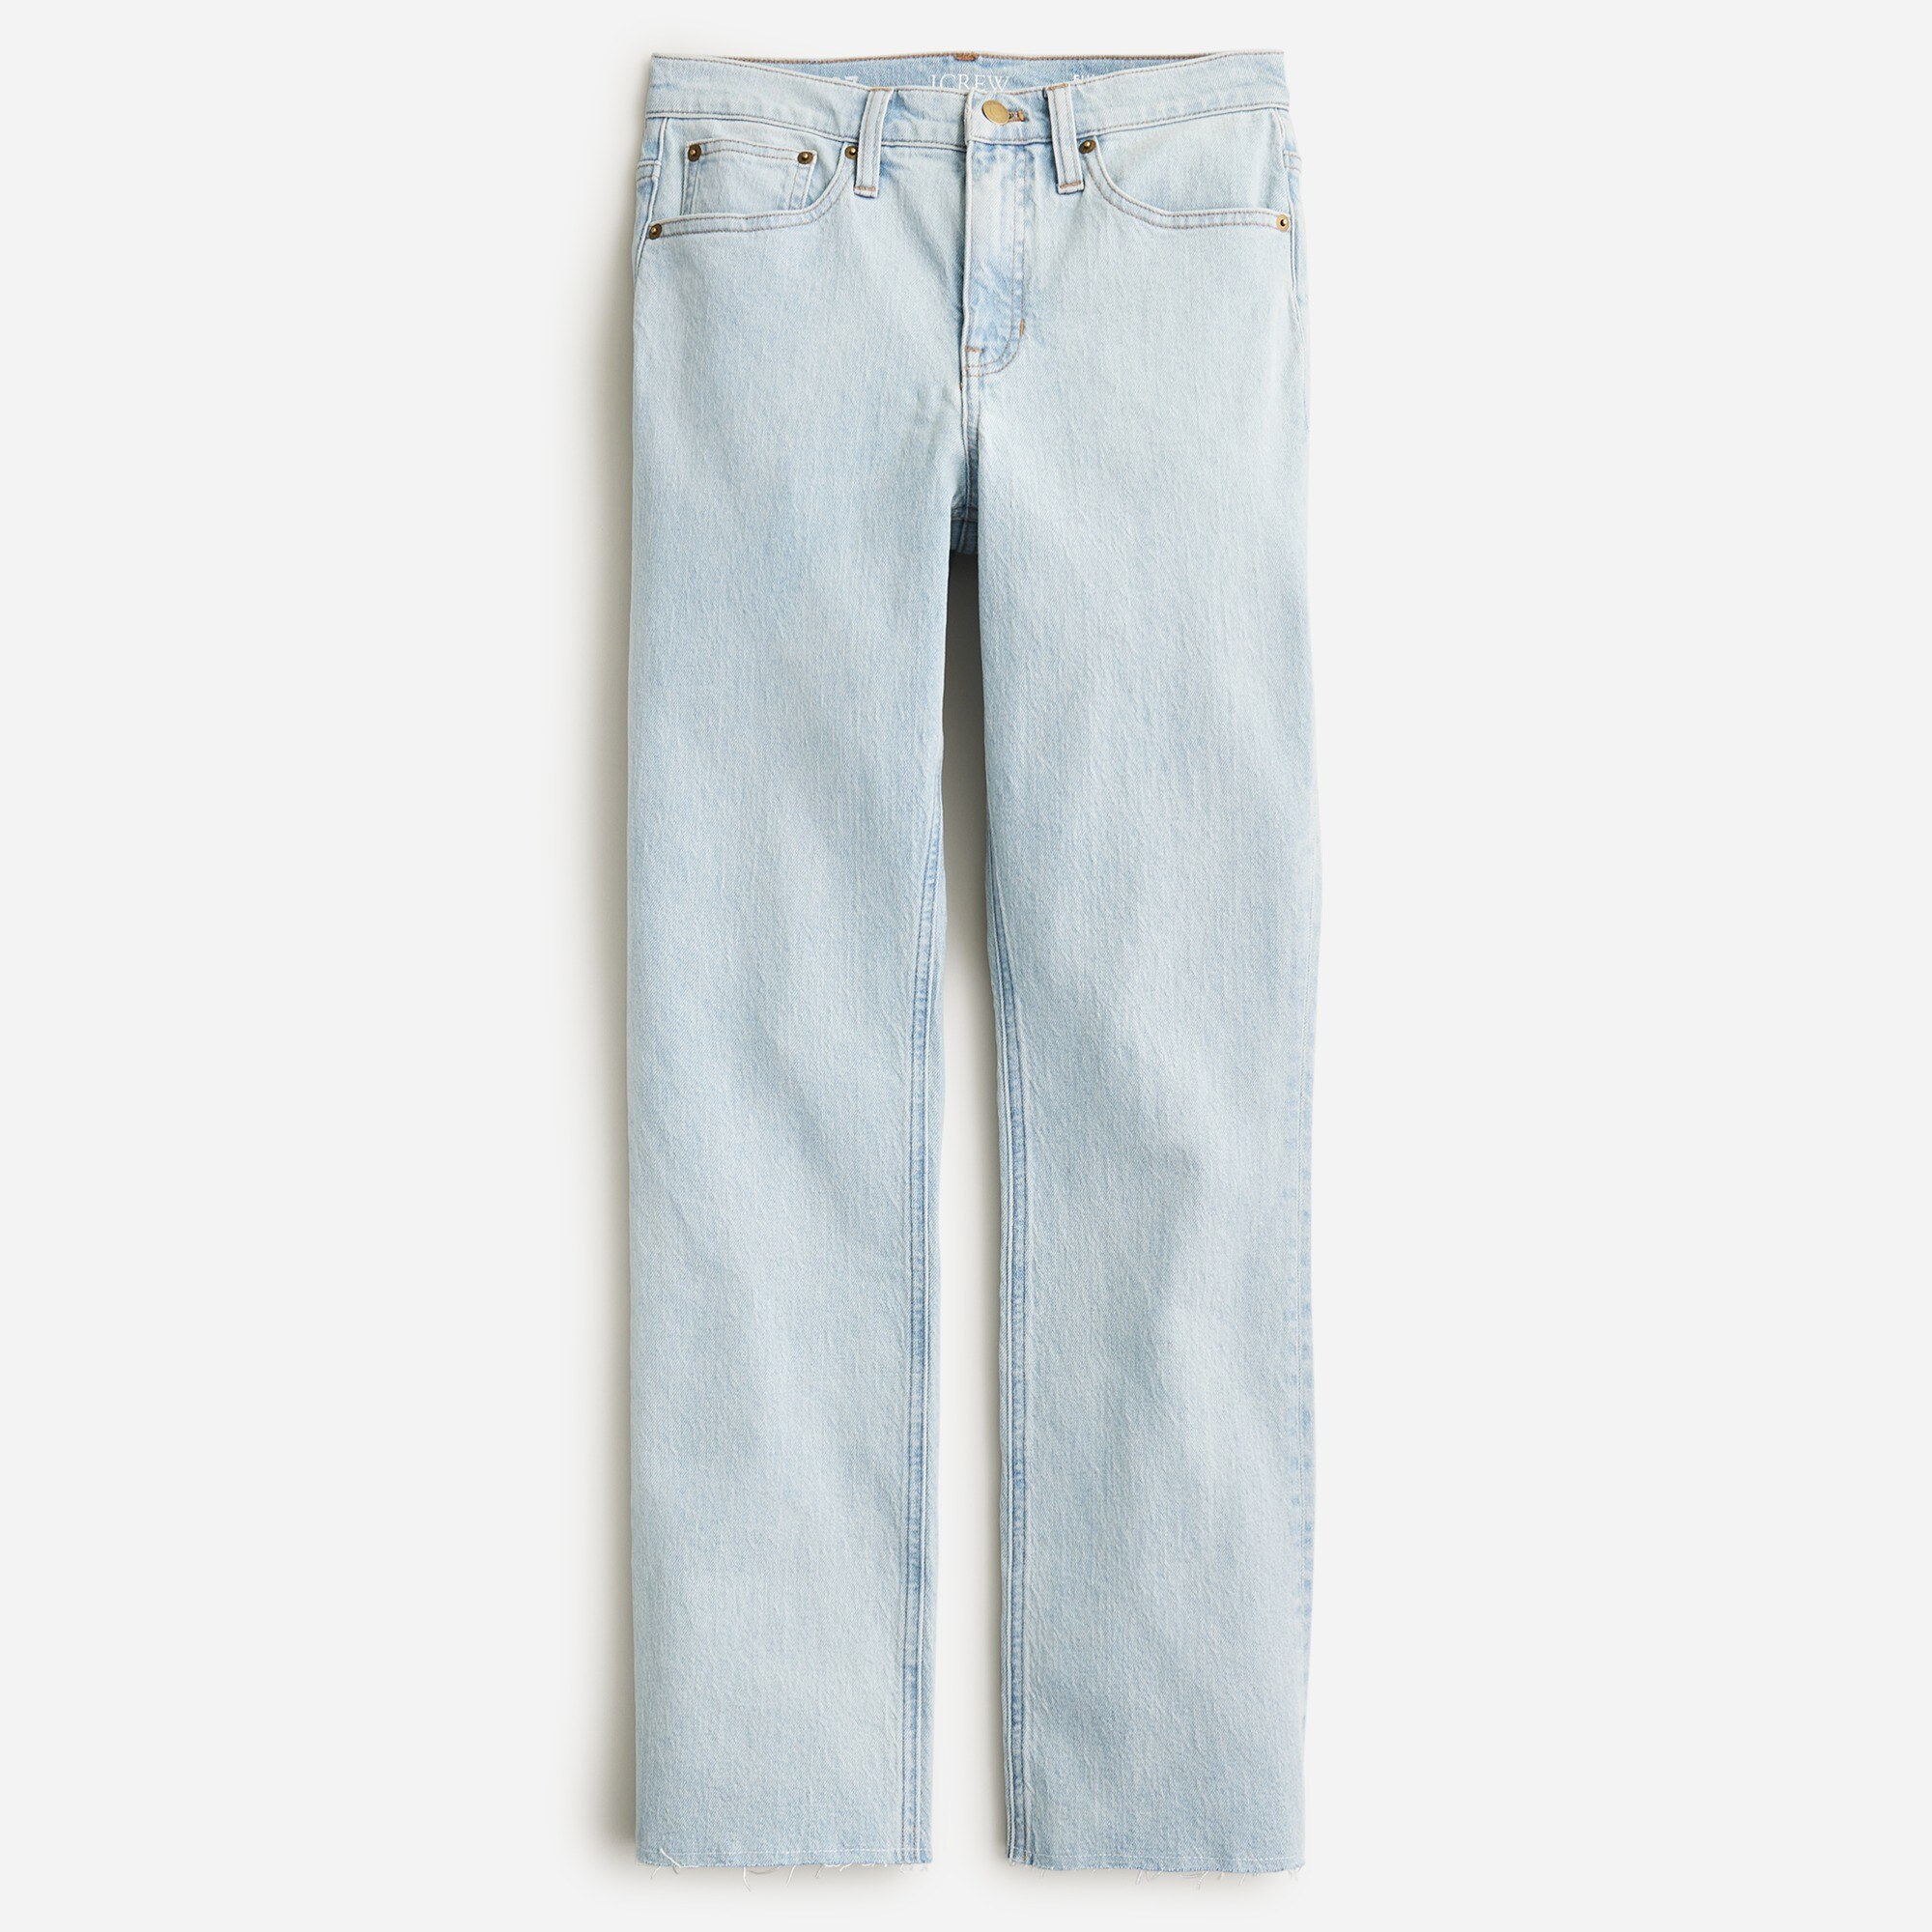  Full-length demi-boot jean in Clear Water wash